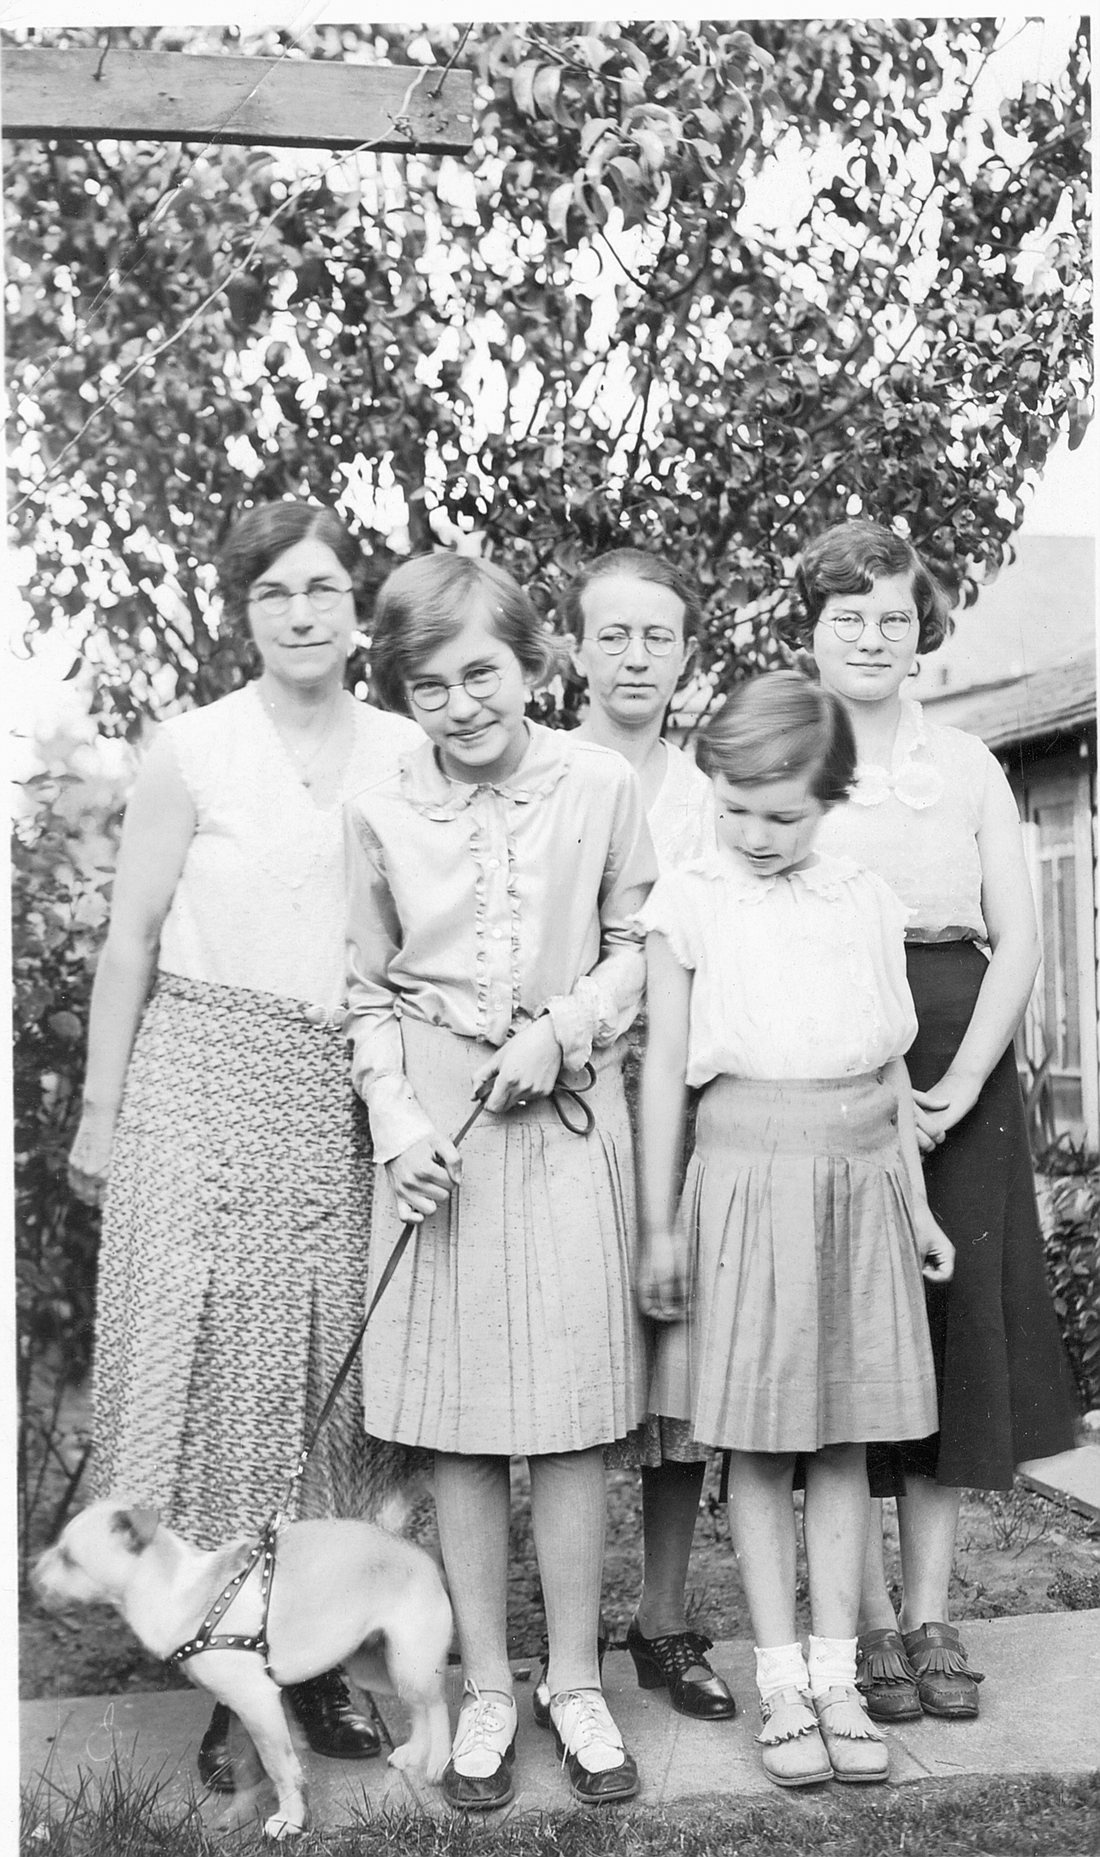 At about the same time as the star poem, a photo of me holding Micky’s leash.
From left to right, my aunt Aun, Patricia Davis, my mother Pearl, sister Dorothy next to me, and sister Frances behind her.